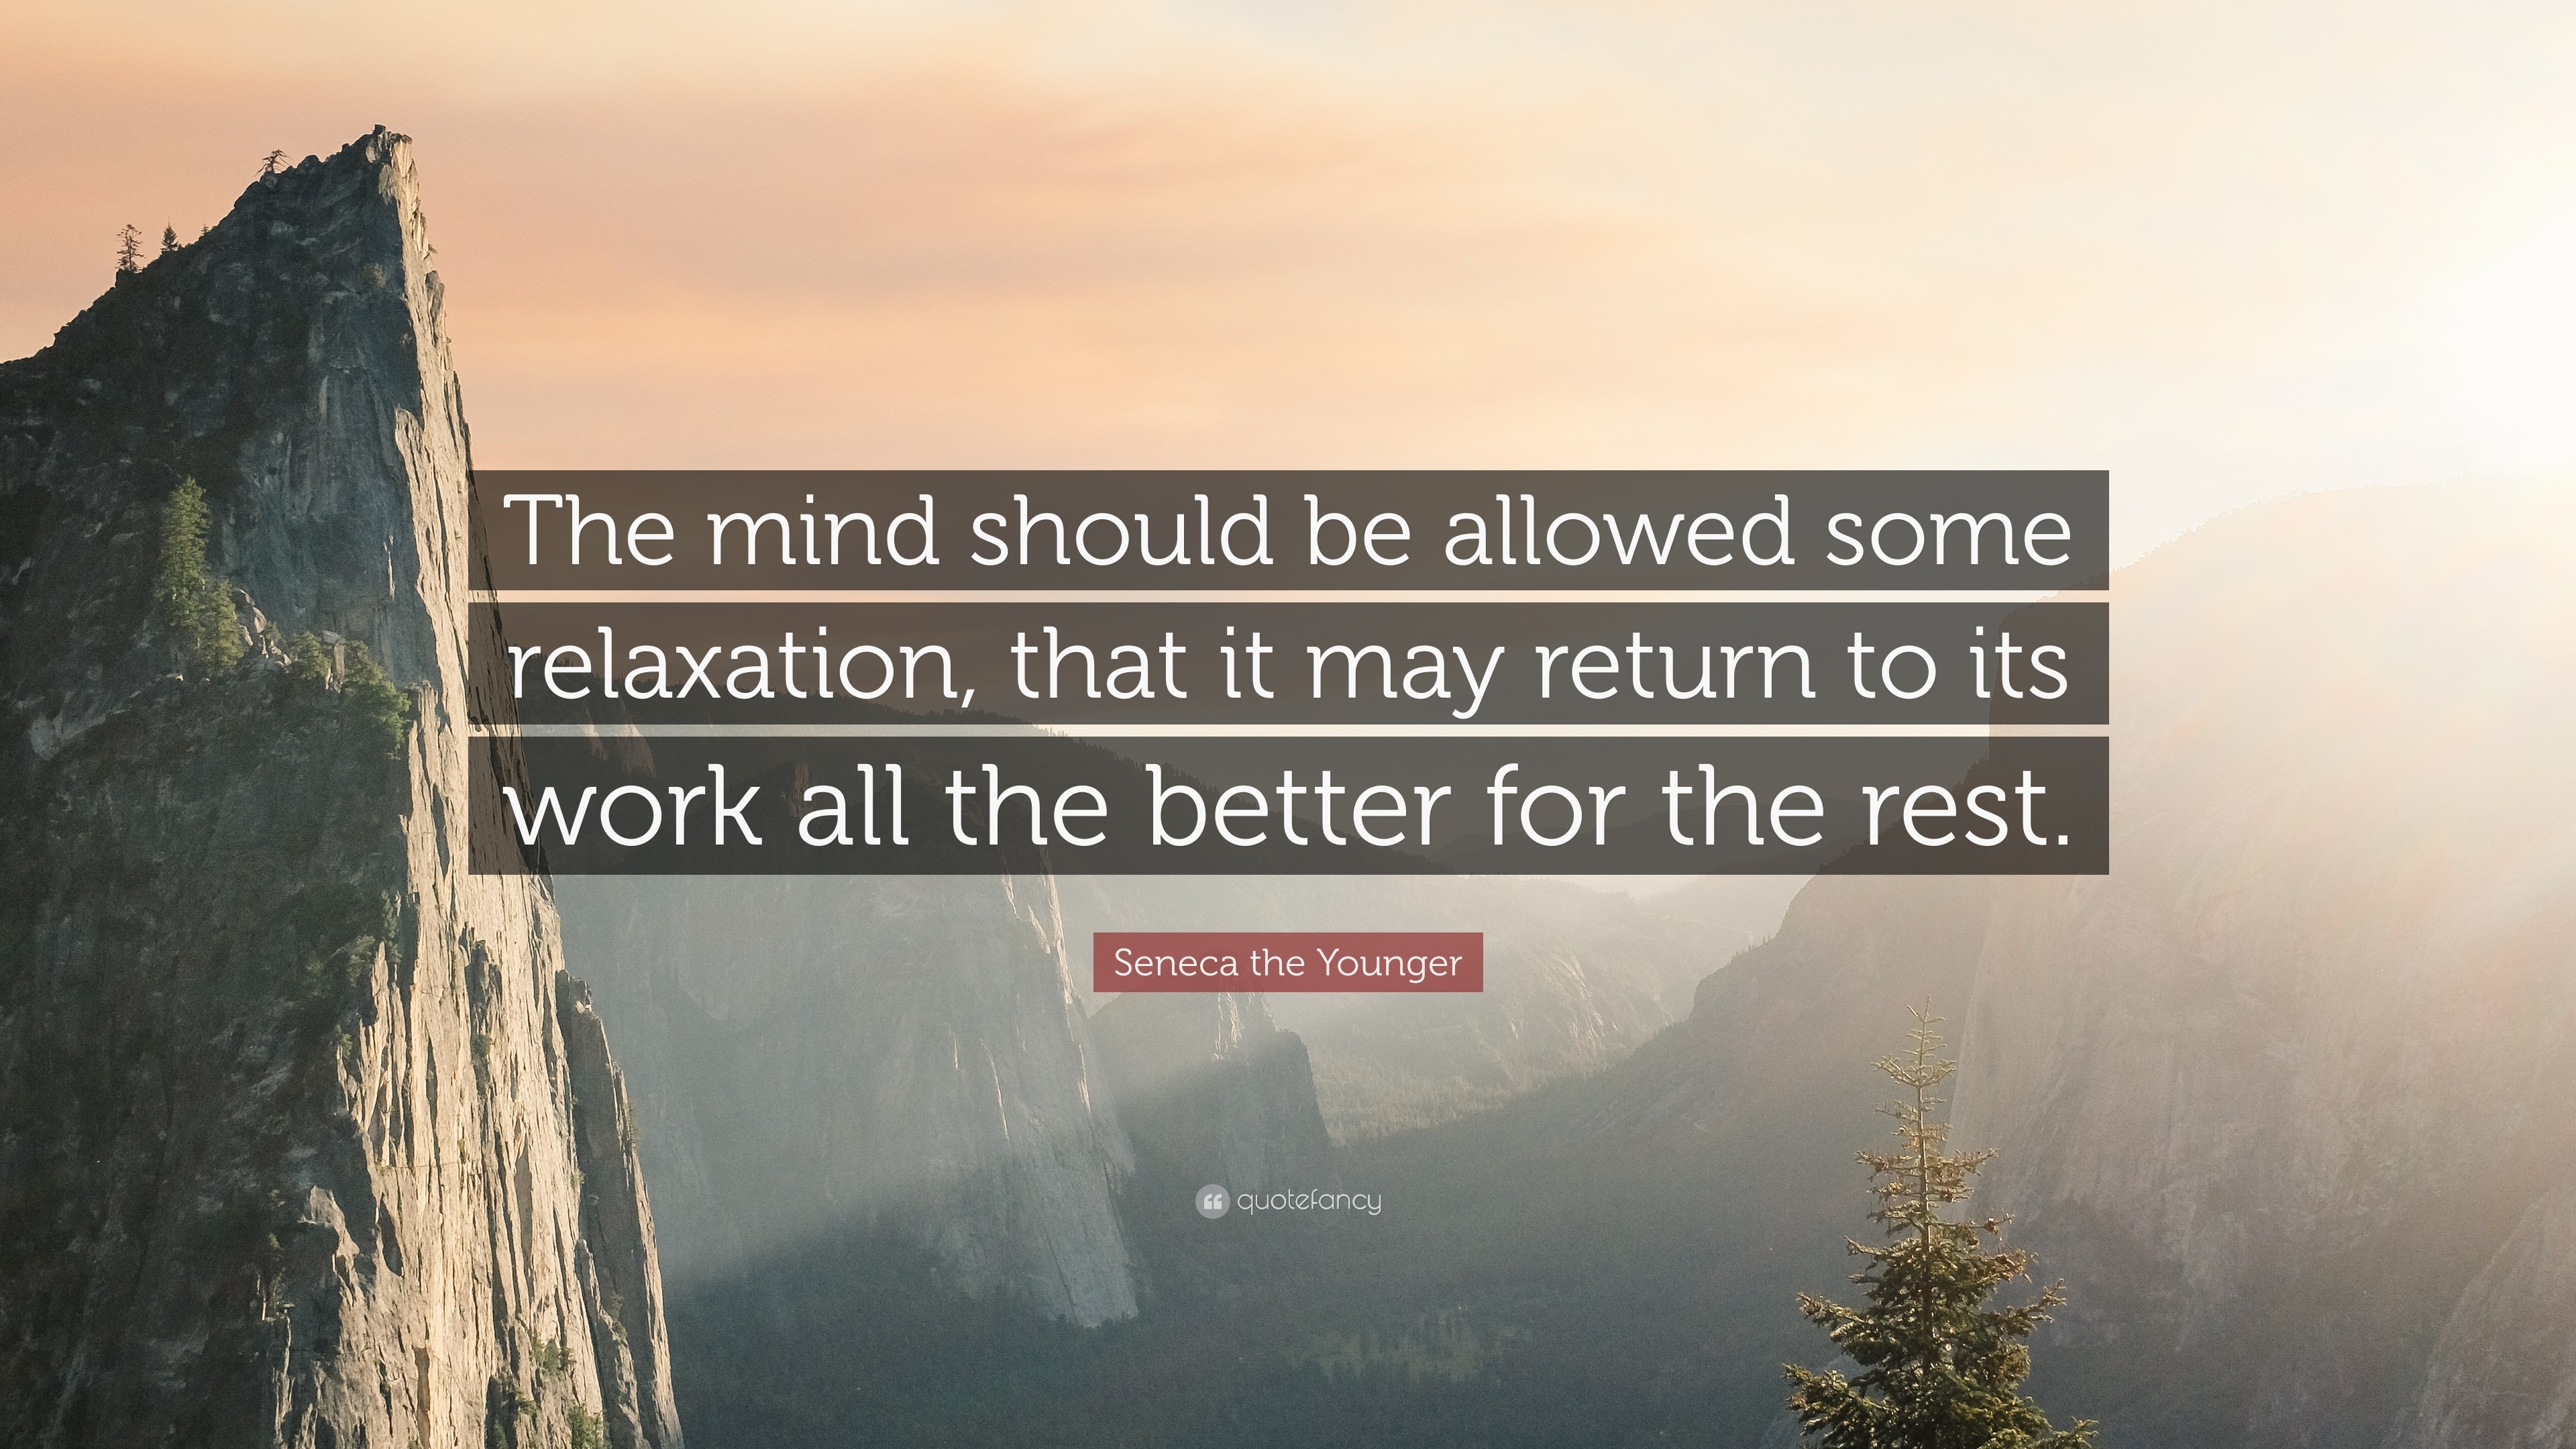 3840x2160 Seneca the Younger Quote: “The mind should be allowed some relaxation, that  it